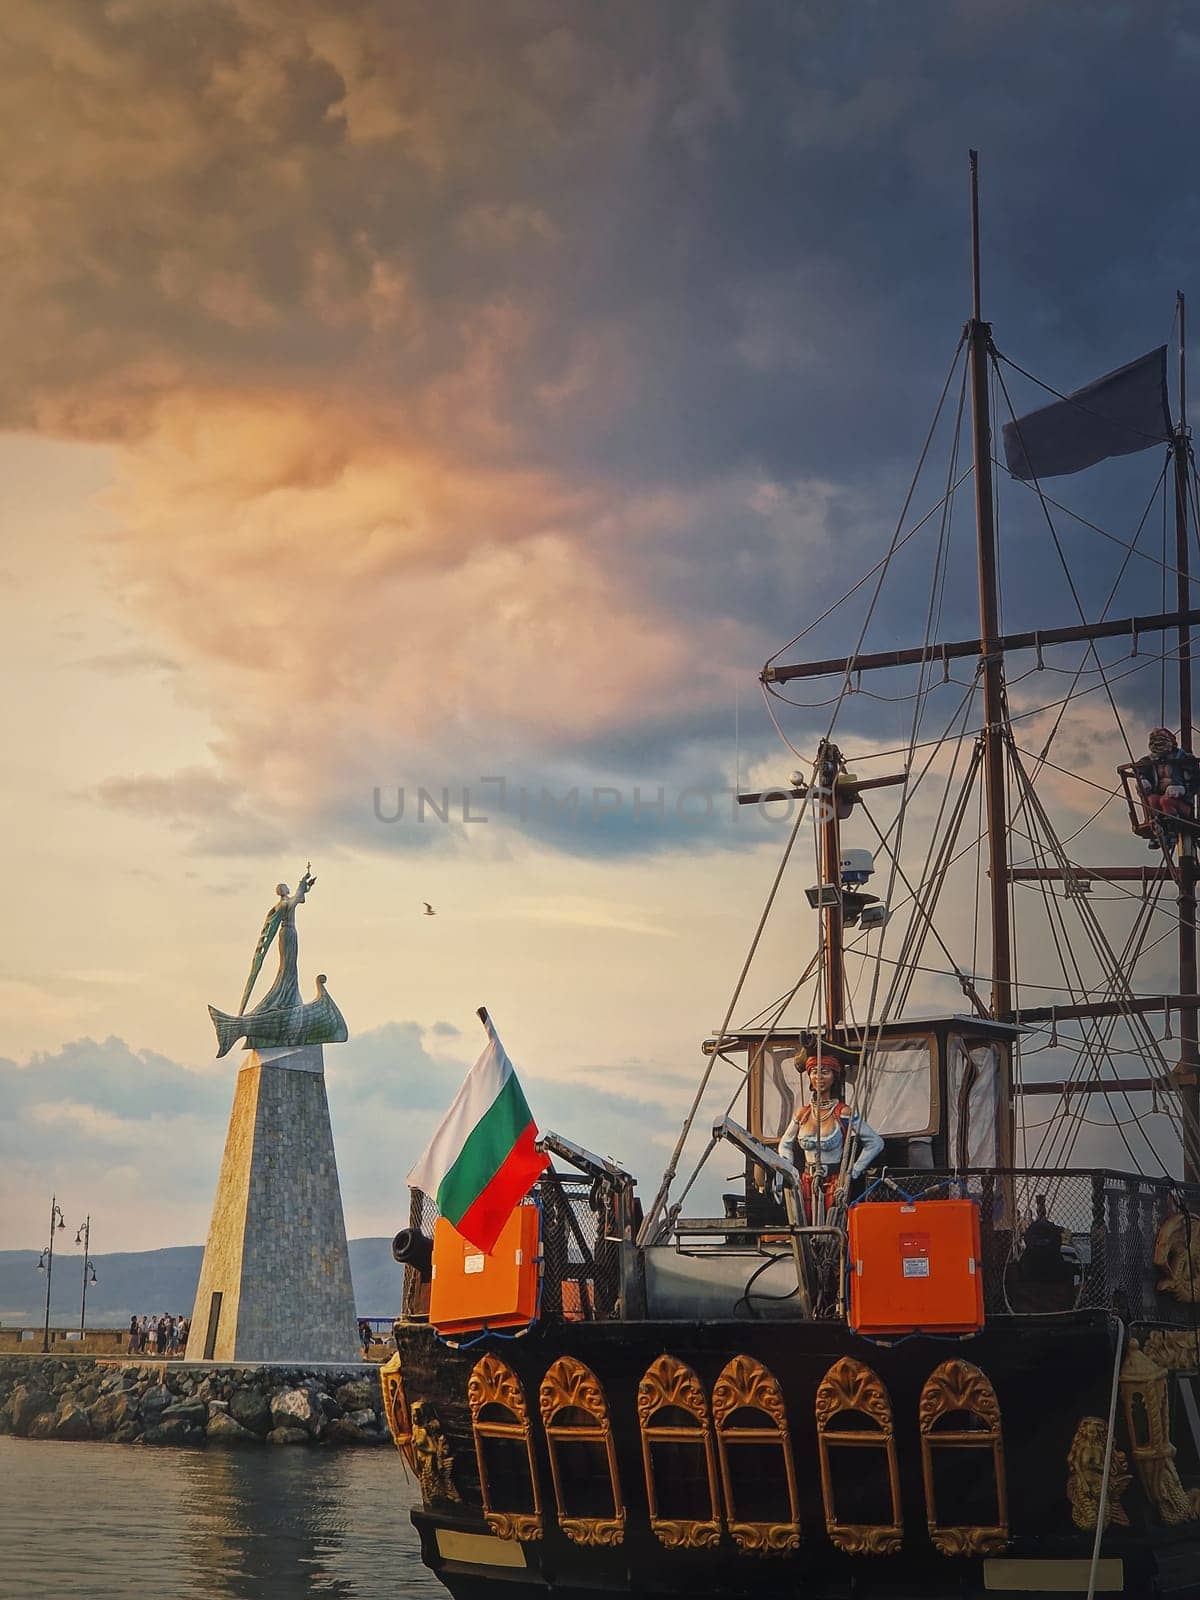 Statue of Saint Nicholas the patron of sailors, in the old town of Nessebar, Burgas, Bulgaria. Sunset scene at the coastline with a sail ship moored at the deck